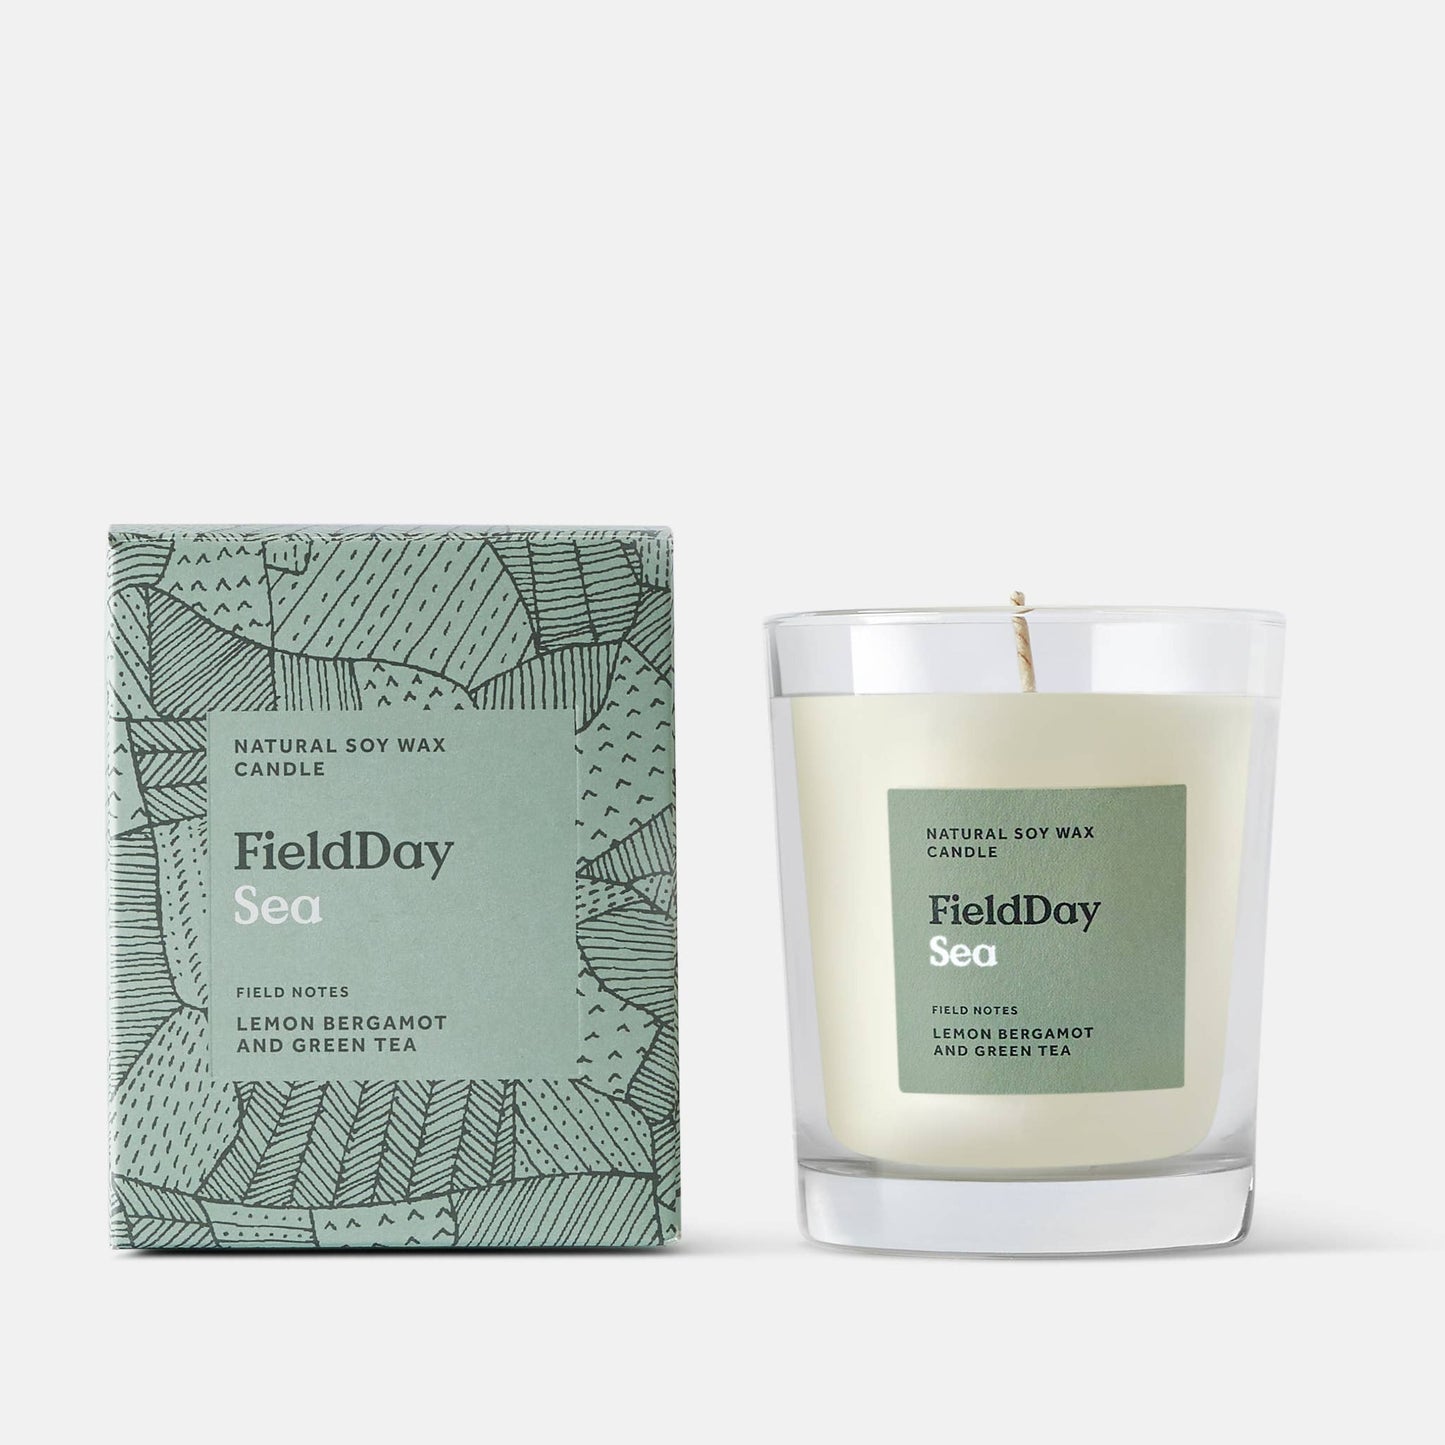 FieldDay Sea Large Vegetable Soy Wax Candle